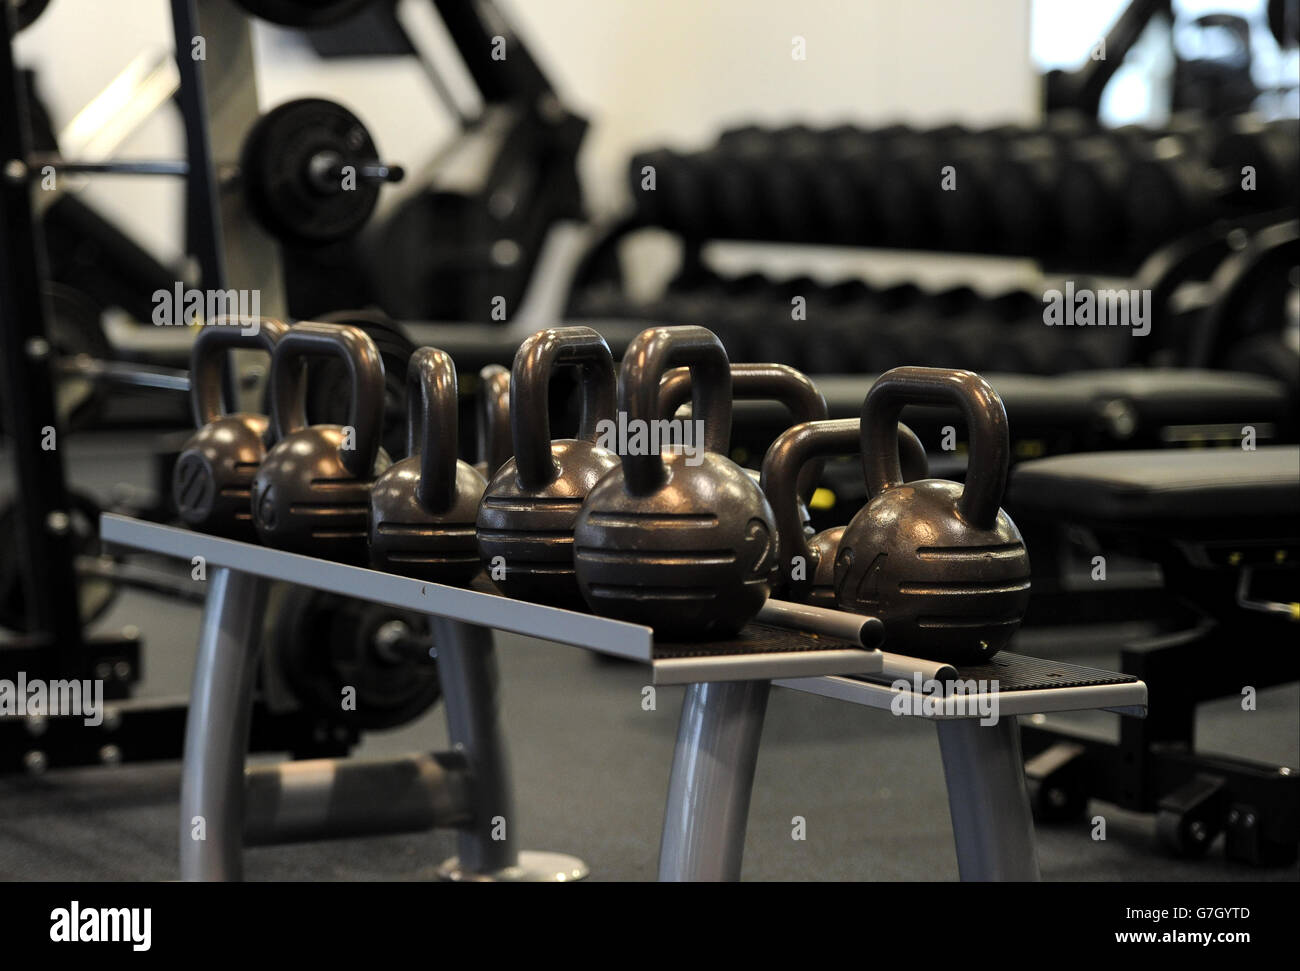 A general view of gym equipment in the gym used by the England football team to train, at St. George's Park, Burton-upon-Trent. Stock Photo